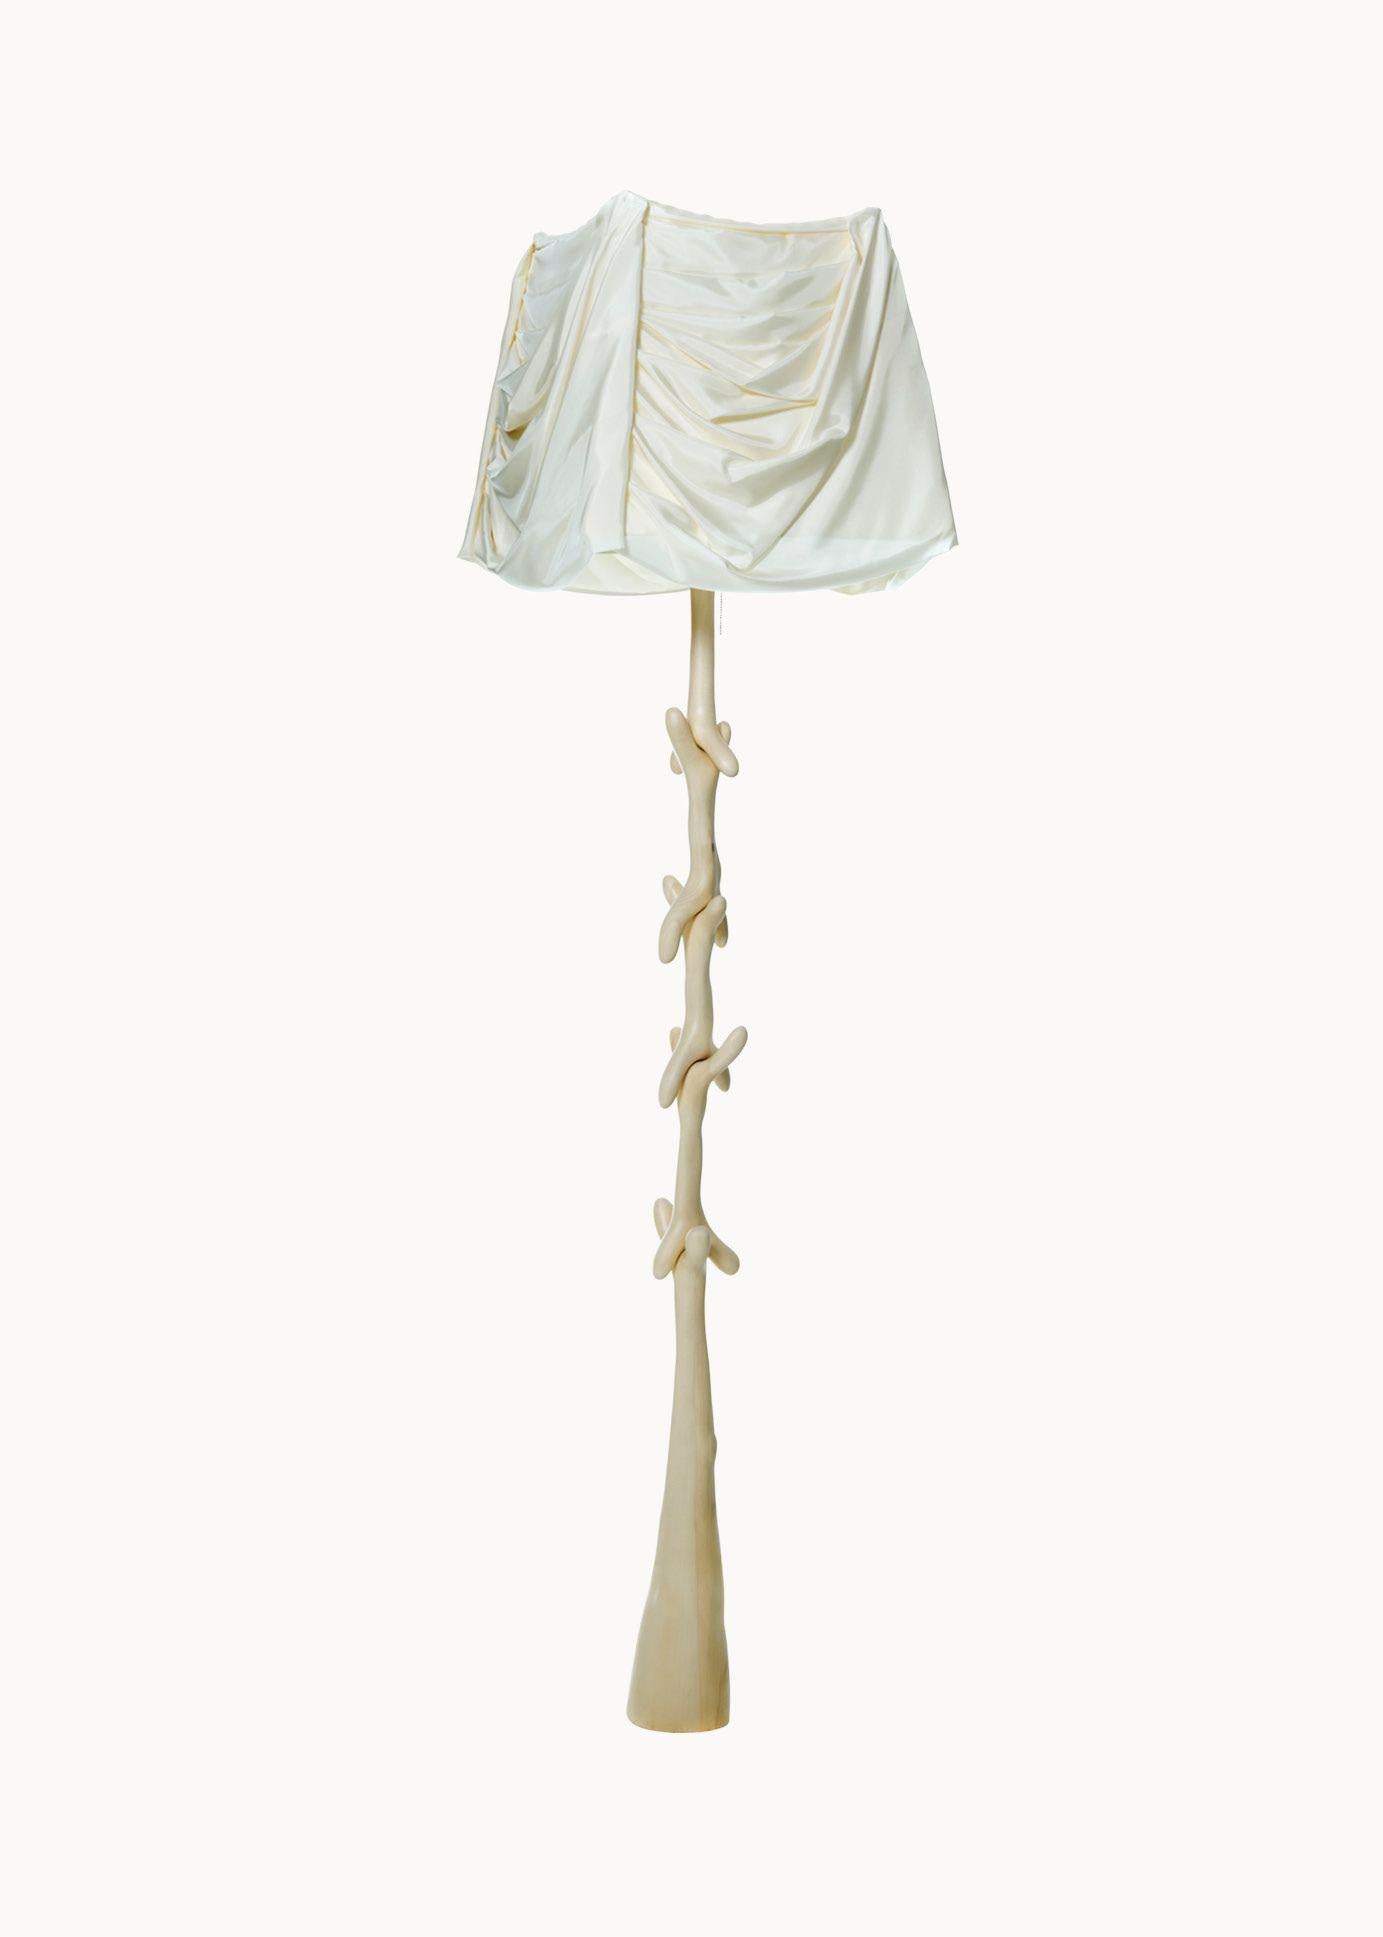 Illuminate your space with a one-of-a-kind standing lamp, designed by Salvador Dali and manufactured by BD furniture in Barcelona. The Muletas and Cajones carved structure, made of pale varnished lime-wood, features a beige linen lampshade that adds